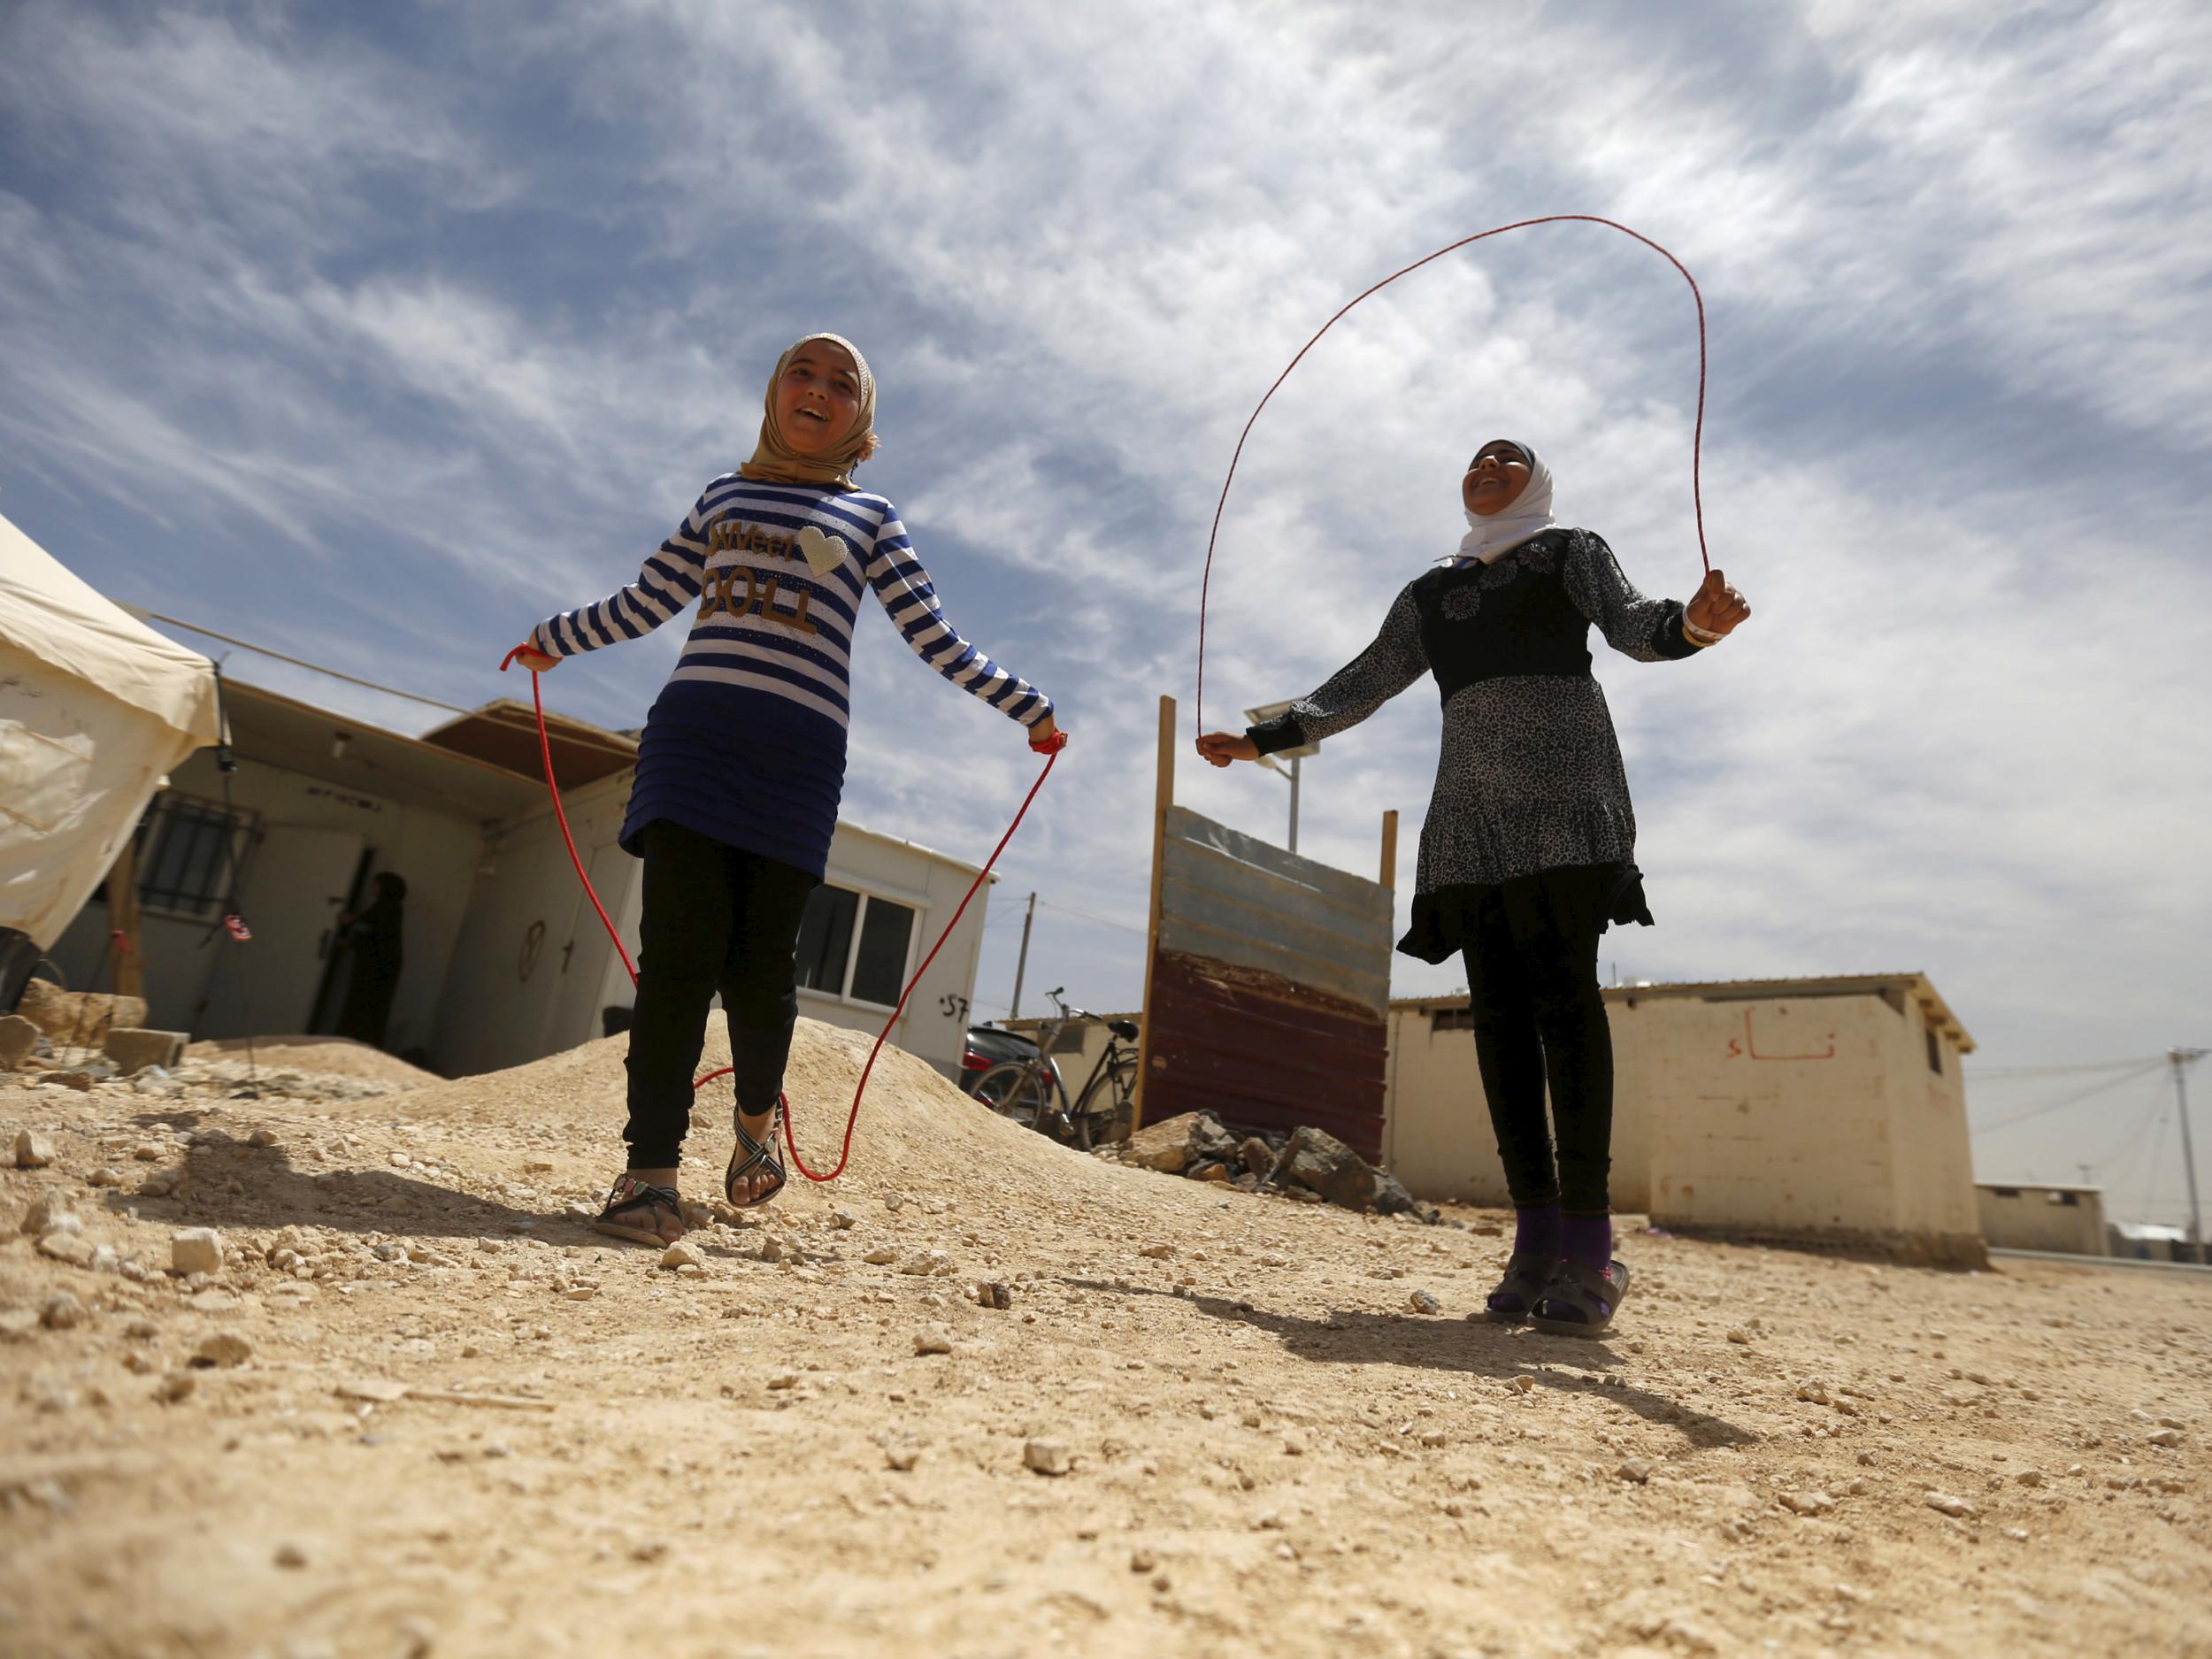 Syrian refugee Omayma al Hushan (left) plays with her friend in the Al Zaatari refugee camp in the Jordanian city of Mafraq